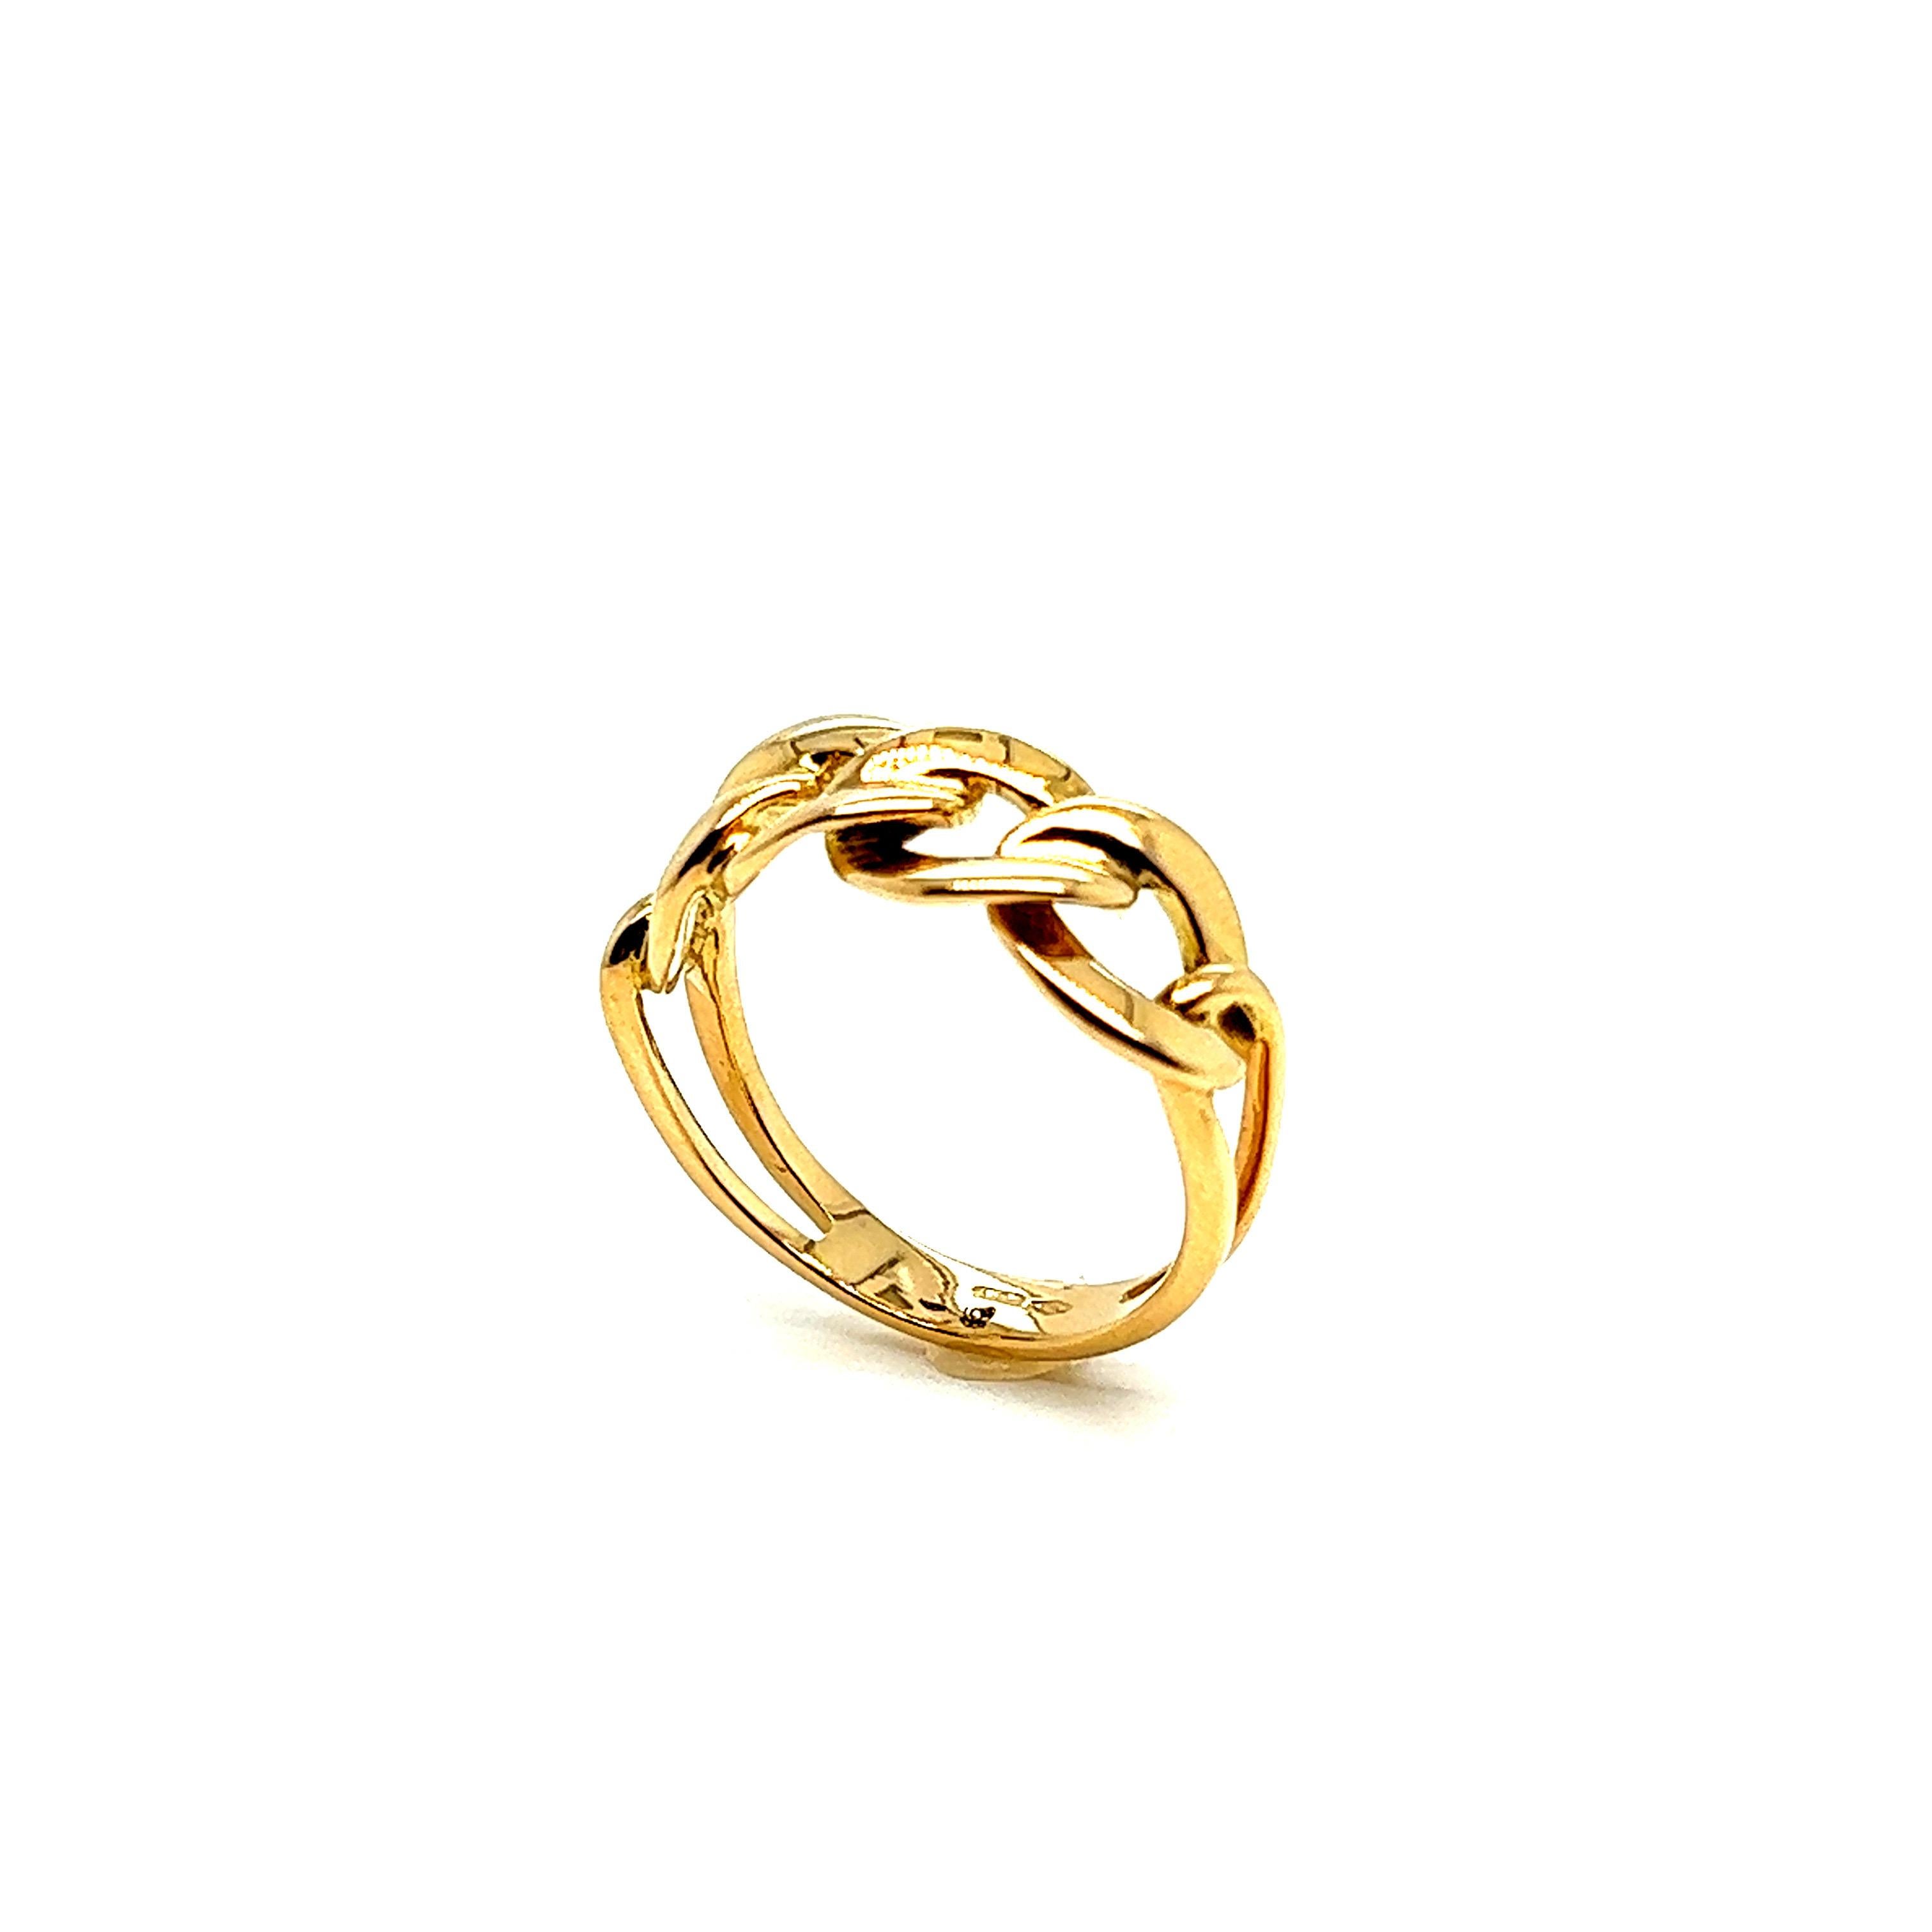 French Ring 4 Small Braided Rings Yellow Gold 18 Karat For Sale 5